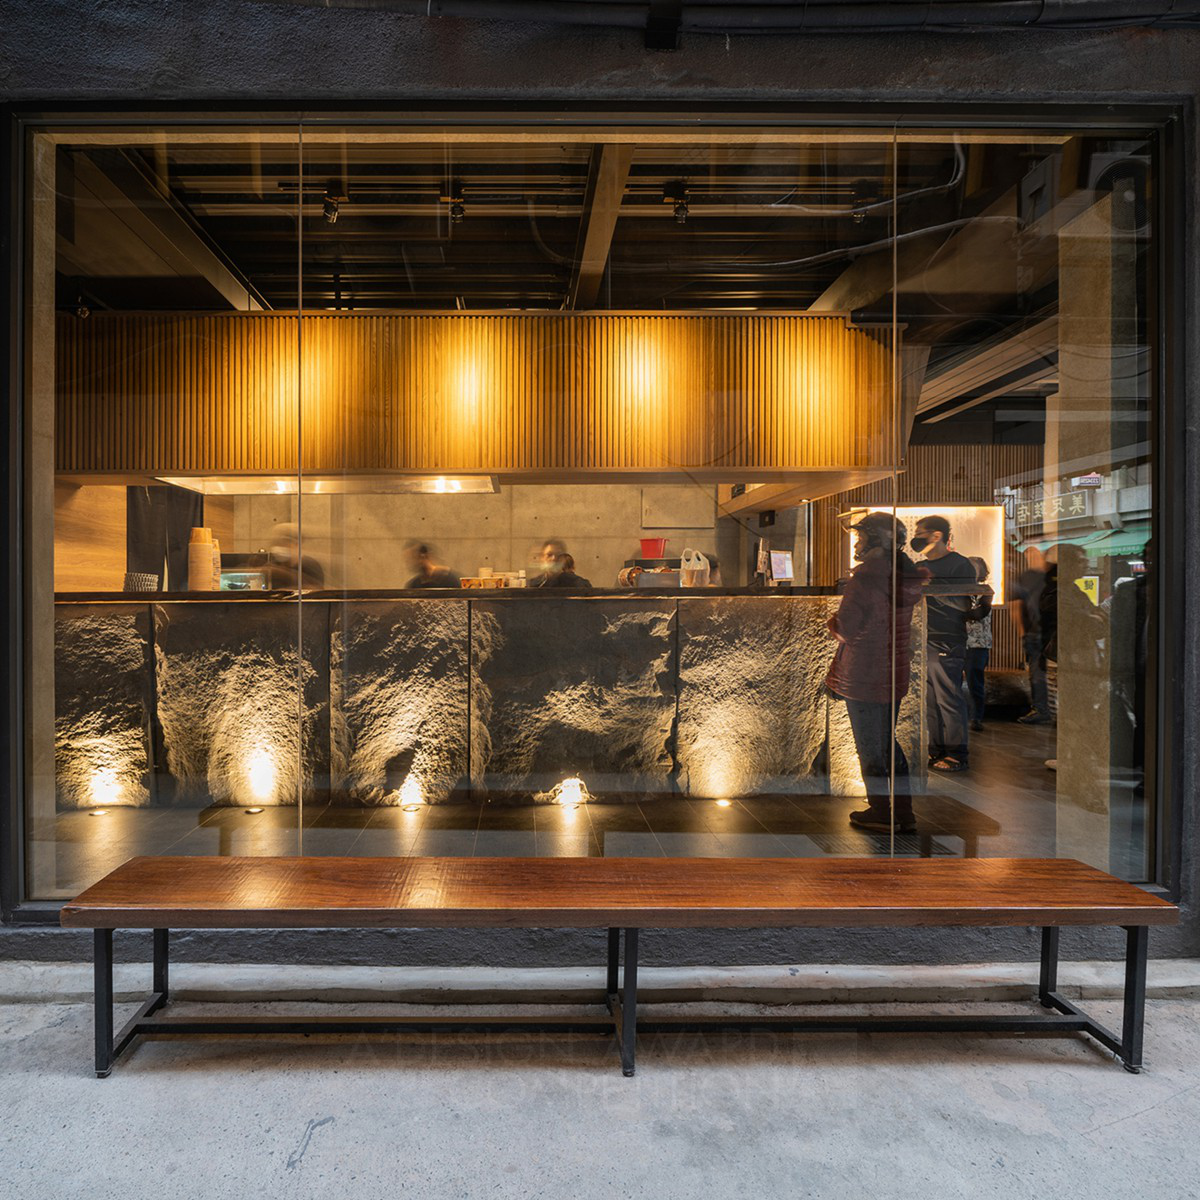 History Unfolds Restaurant by Yu-Ting Chang